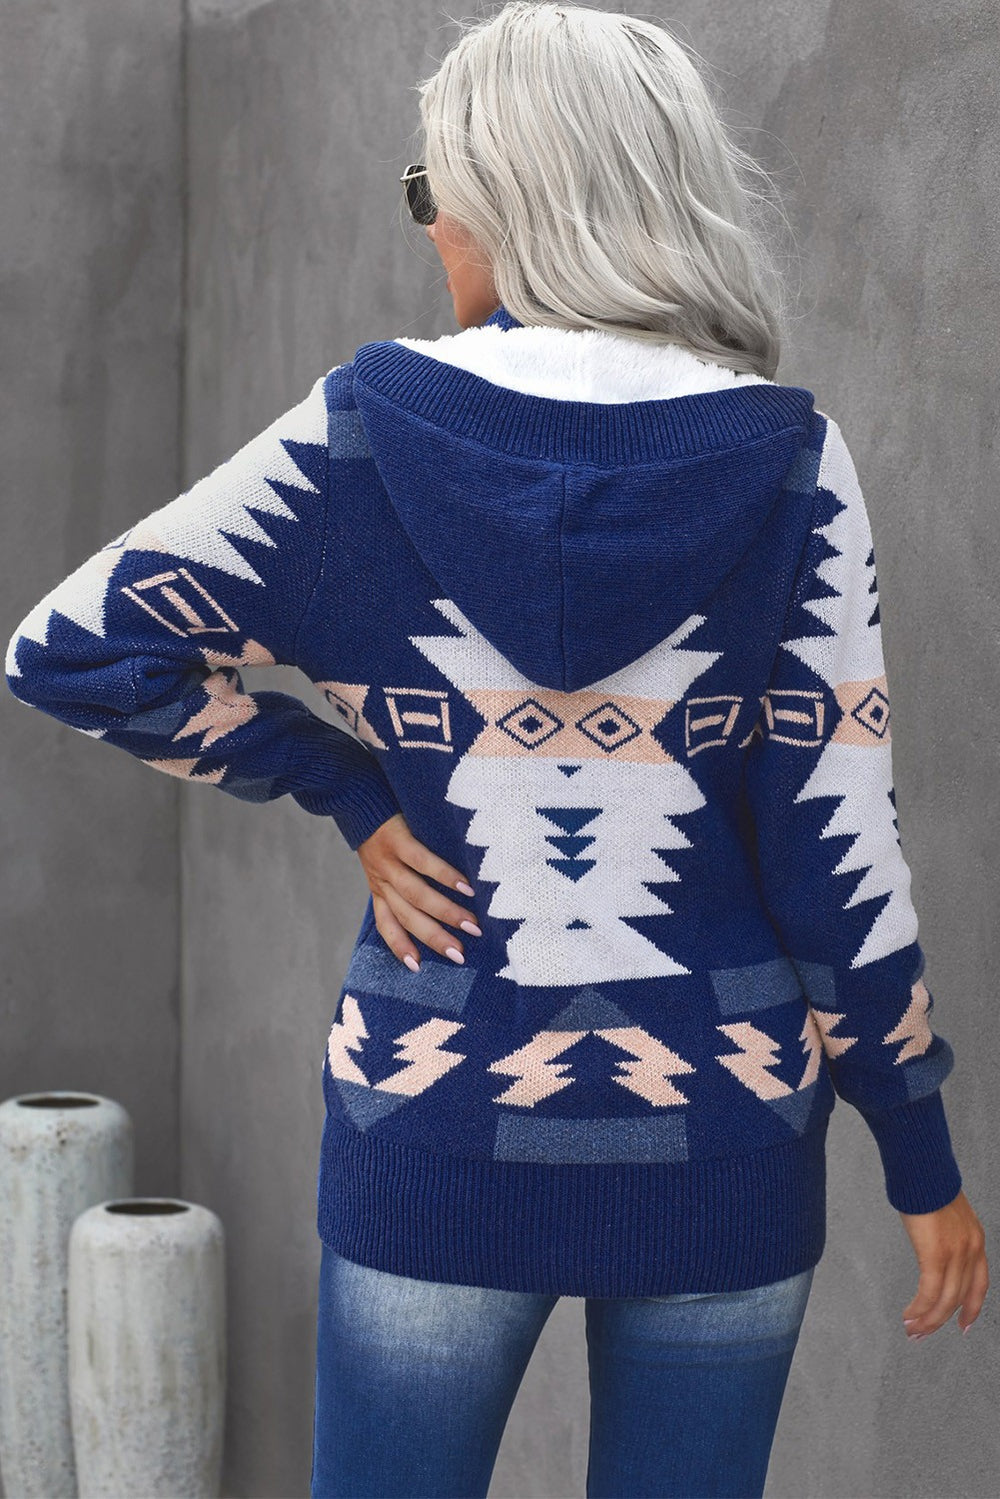 Winter Blue Retro Jacquard Pattern Buttoned Front Hooded Sweater